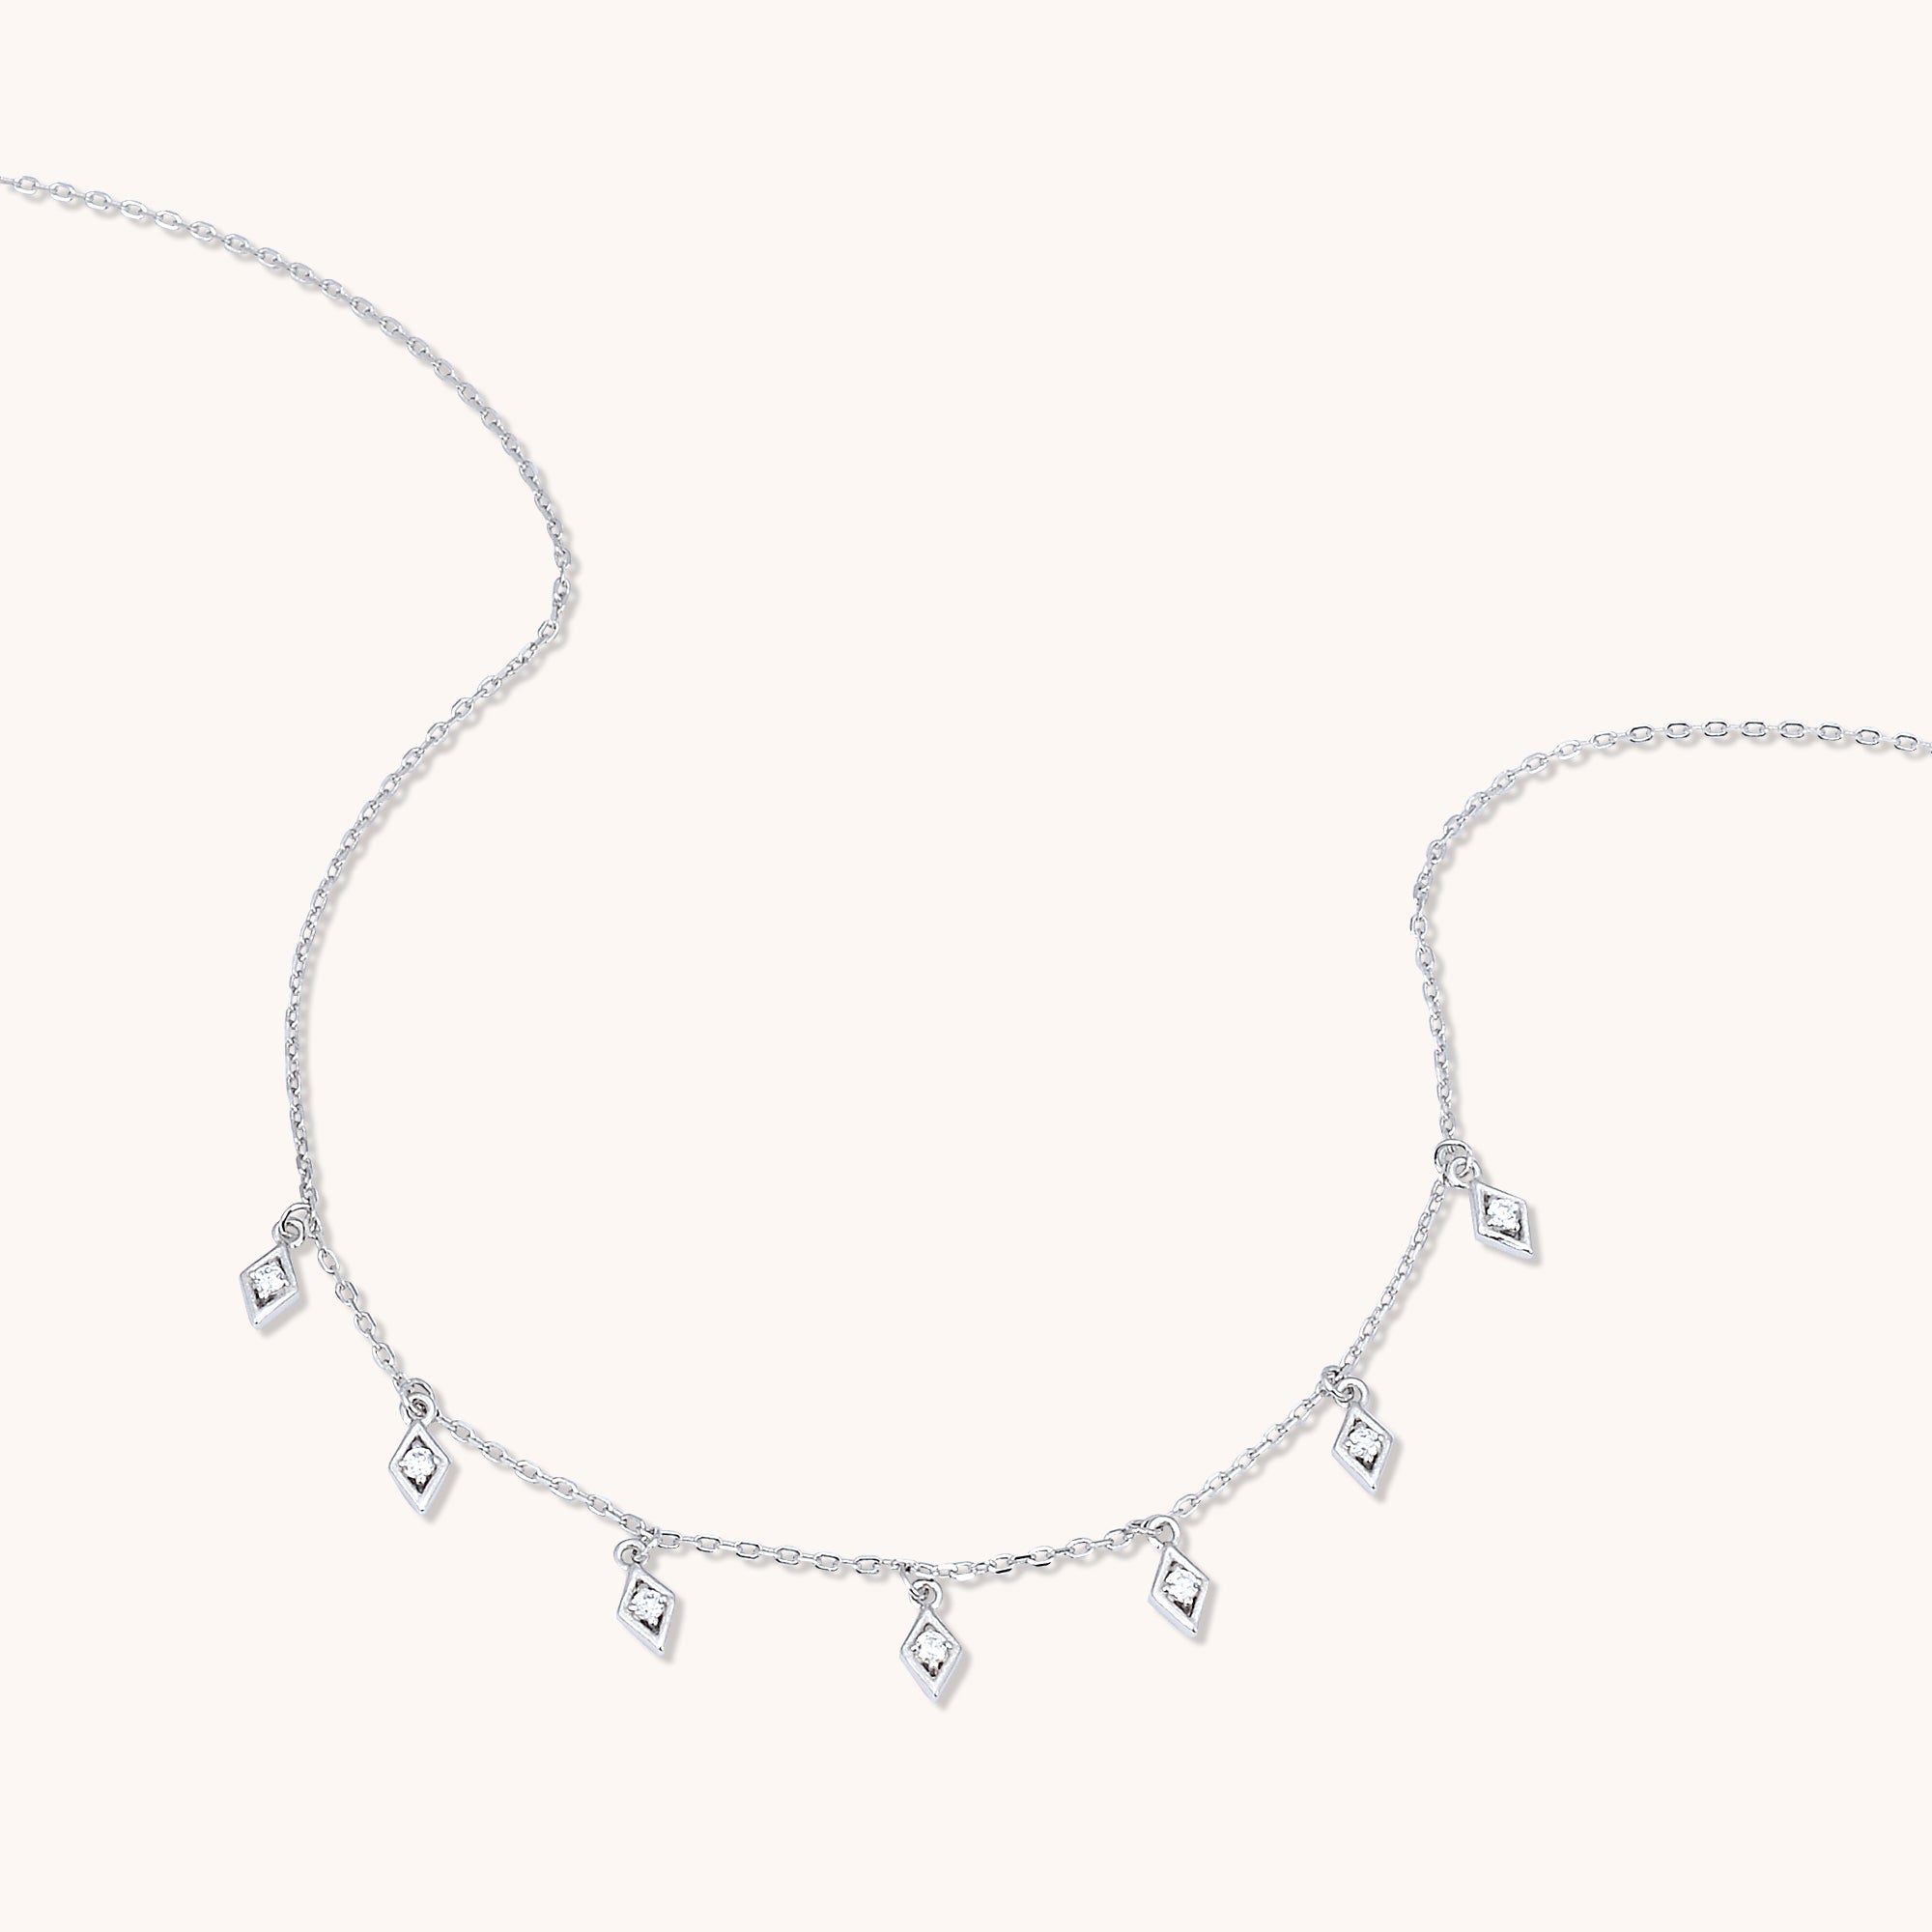 Constellation Dangling Necklace Silver